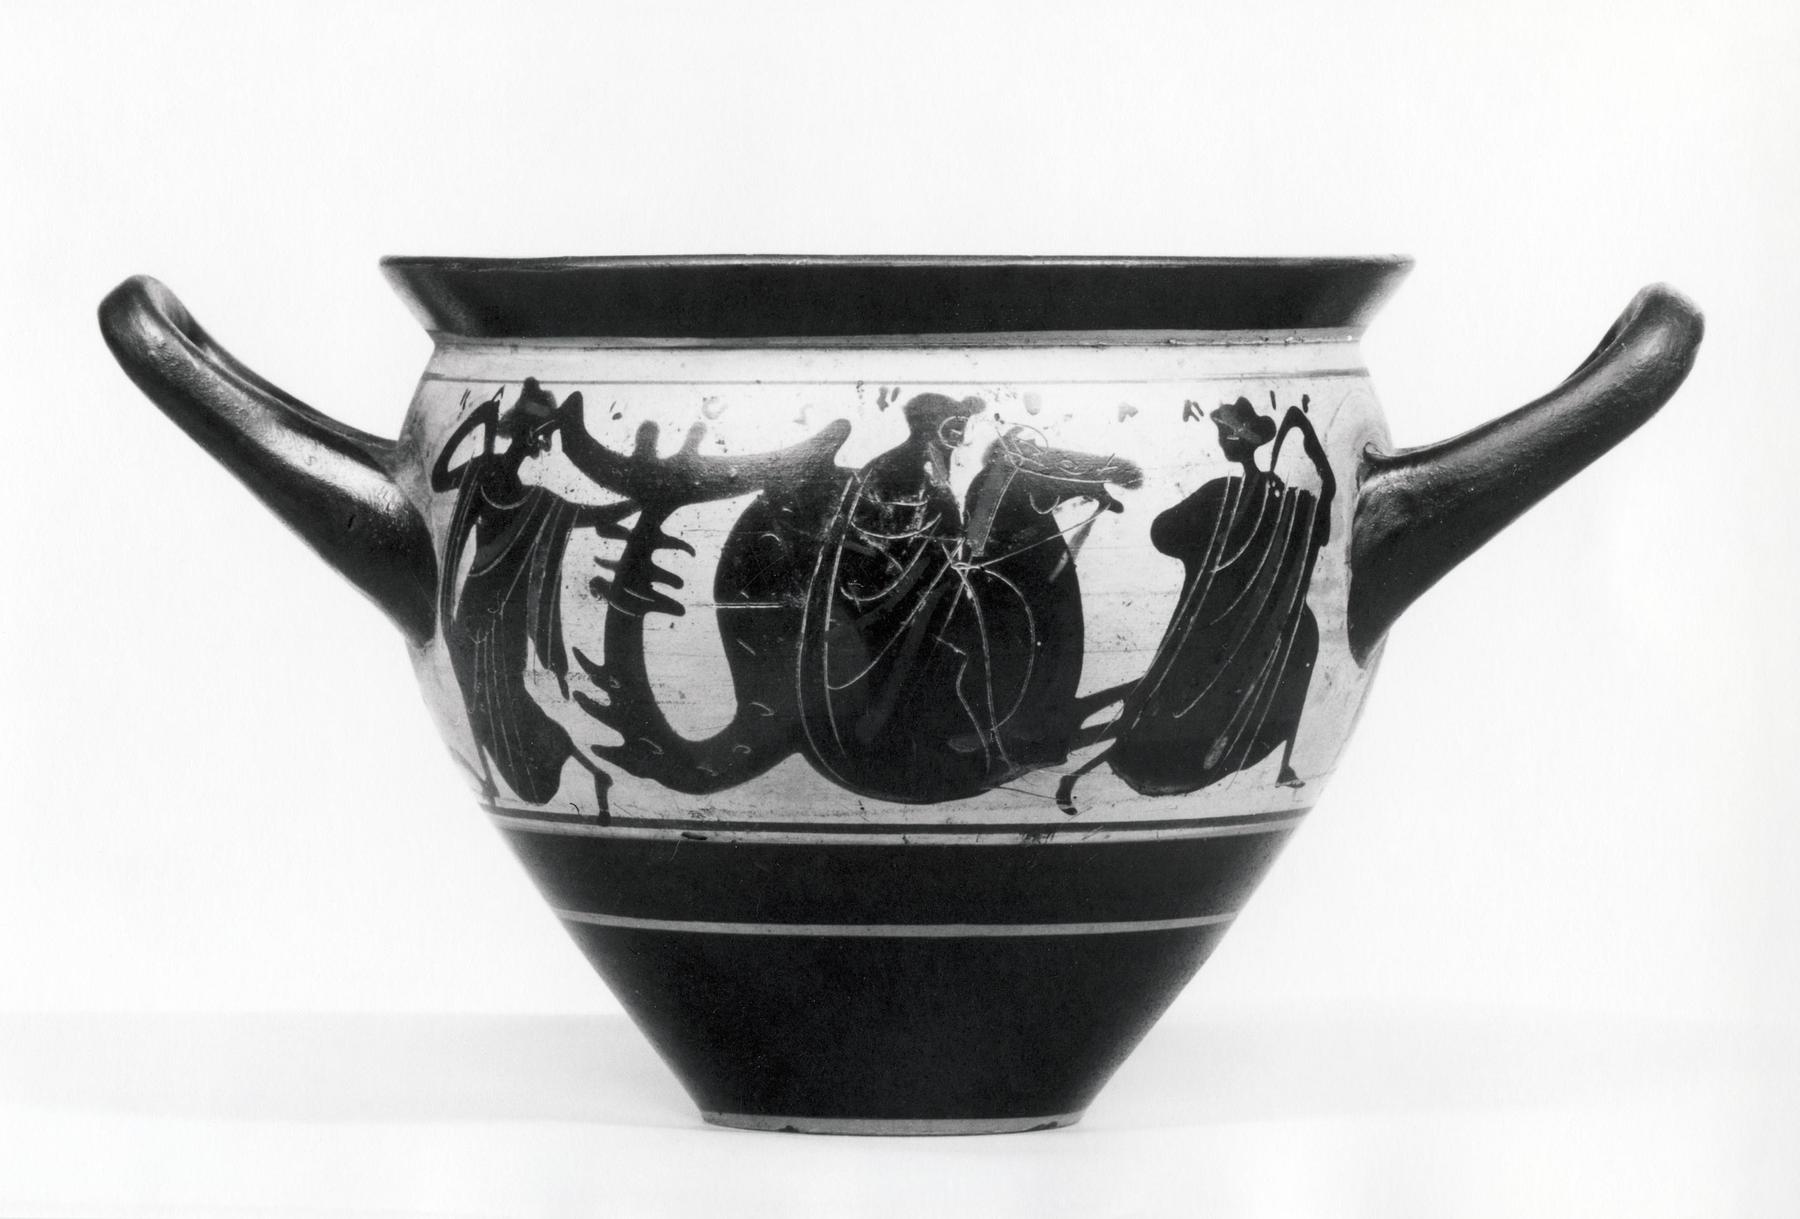 Drinking cup with men riding sea horses and running women (A, B), H537